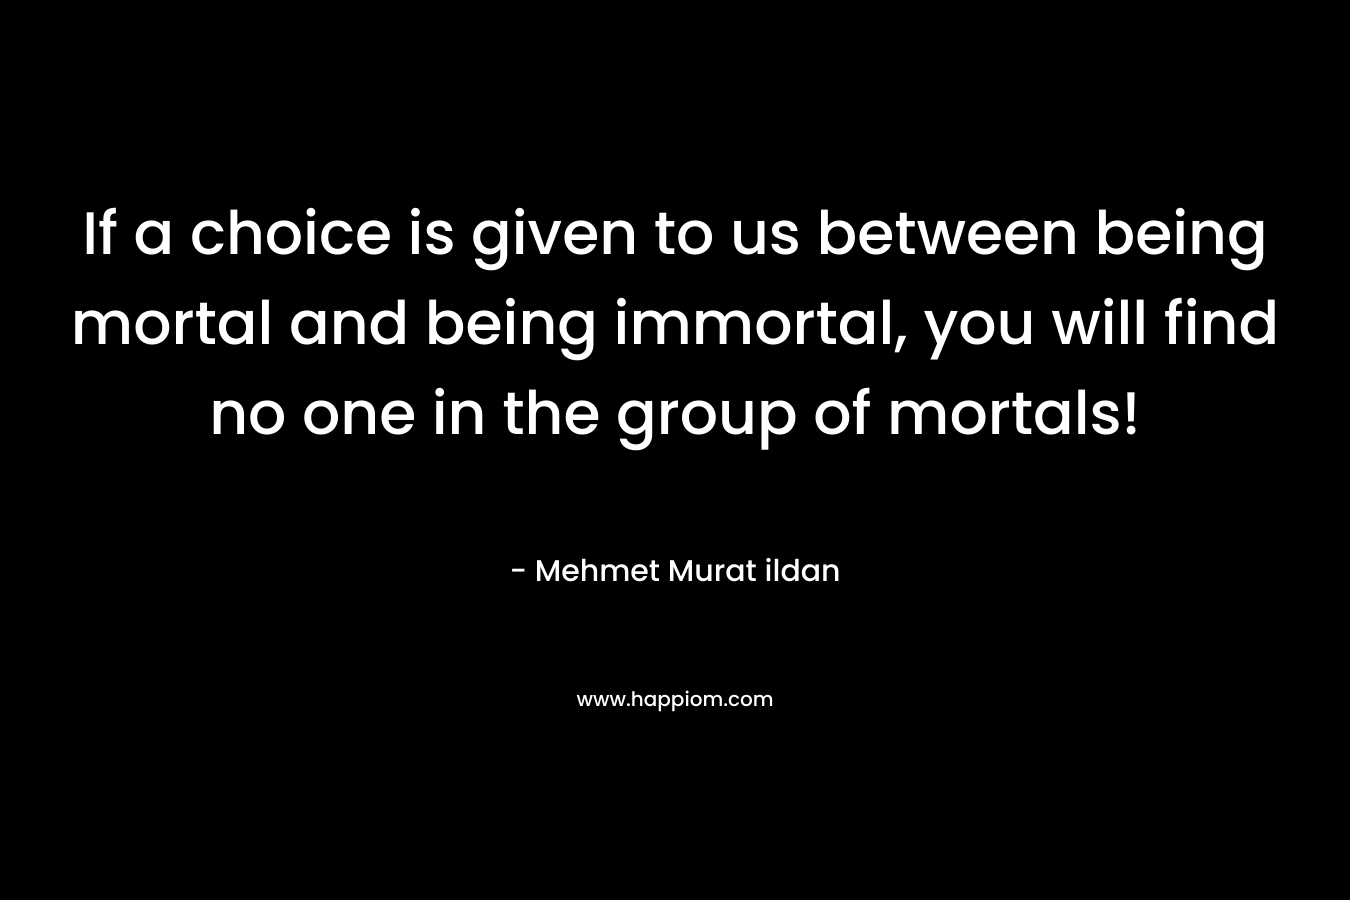 If a choice is given to us between being mortal and being immortal, you will find no one in the group of mortals!